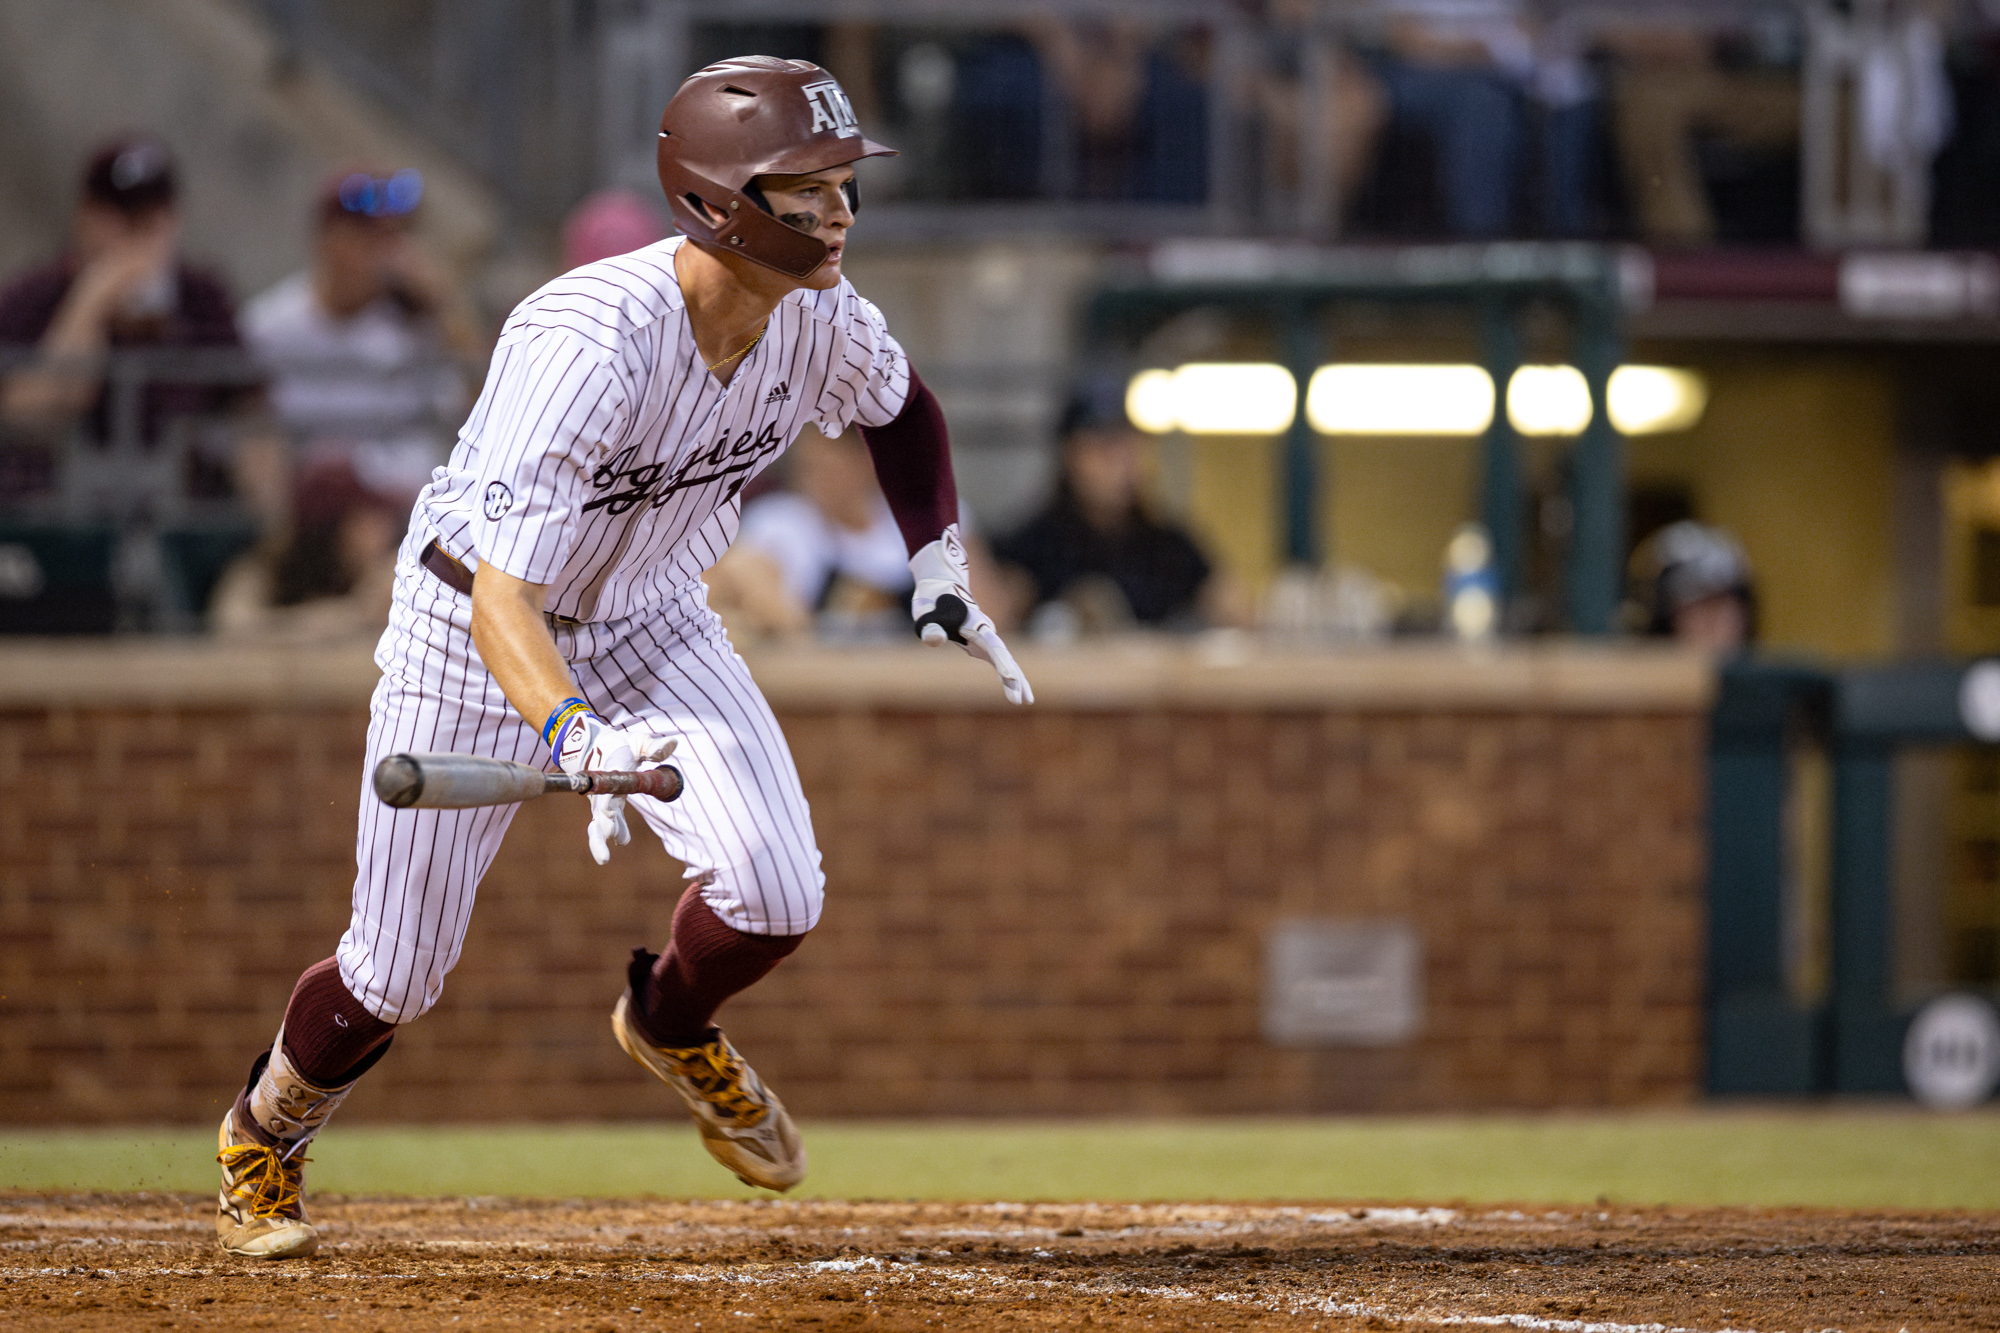 A&M baseball looks to be the thrill of the fight against defending national champions, LSU